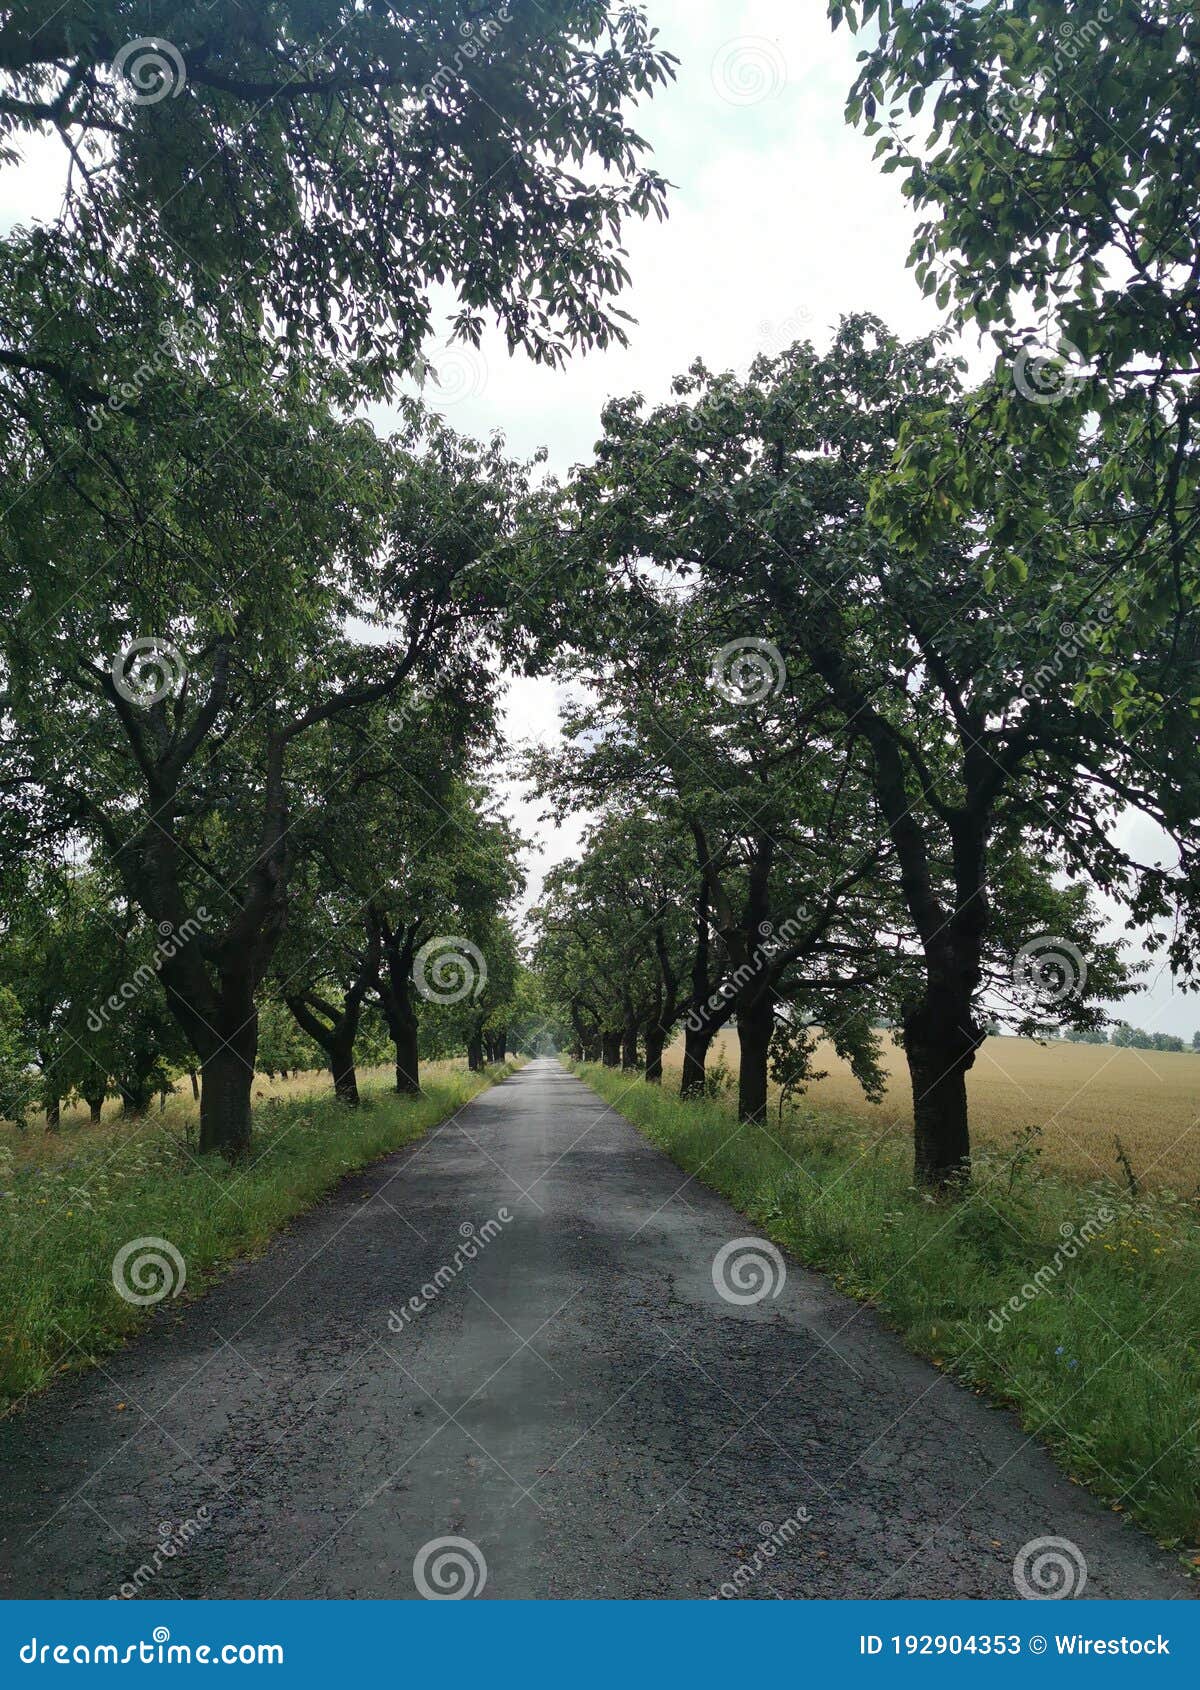 Long Road Surrounded By Greens And Trees Stock Image Image Of Leaf